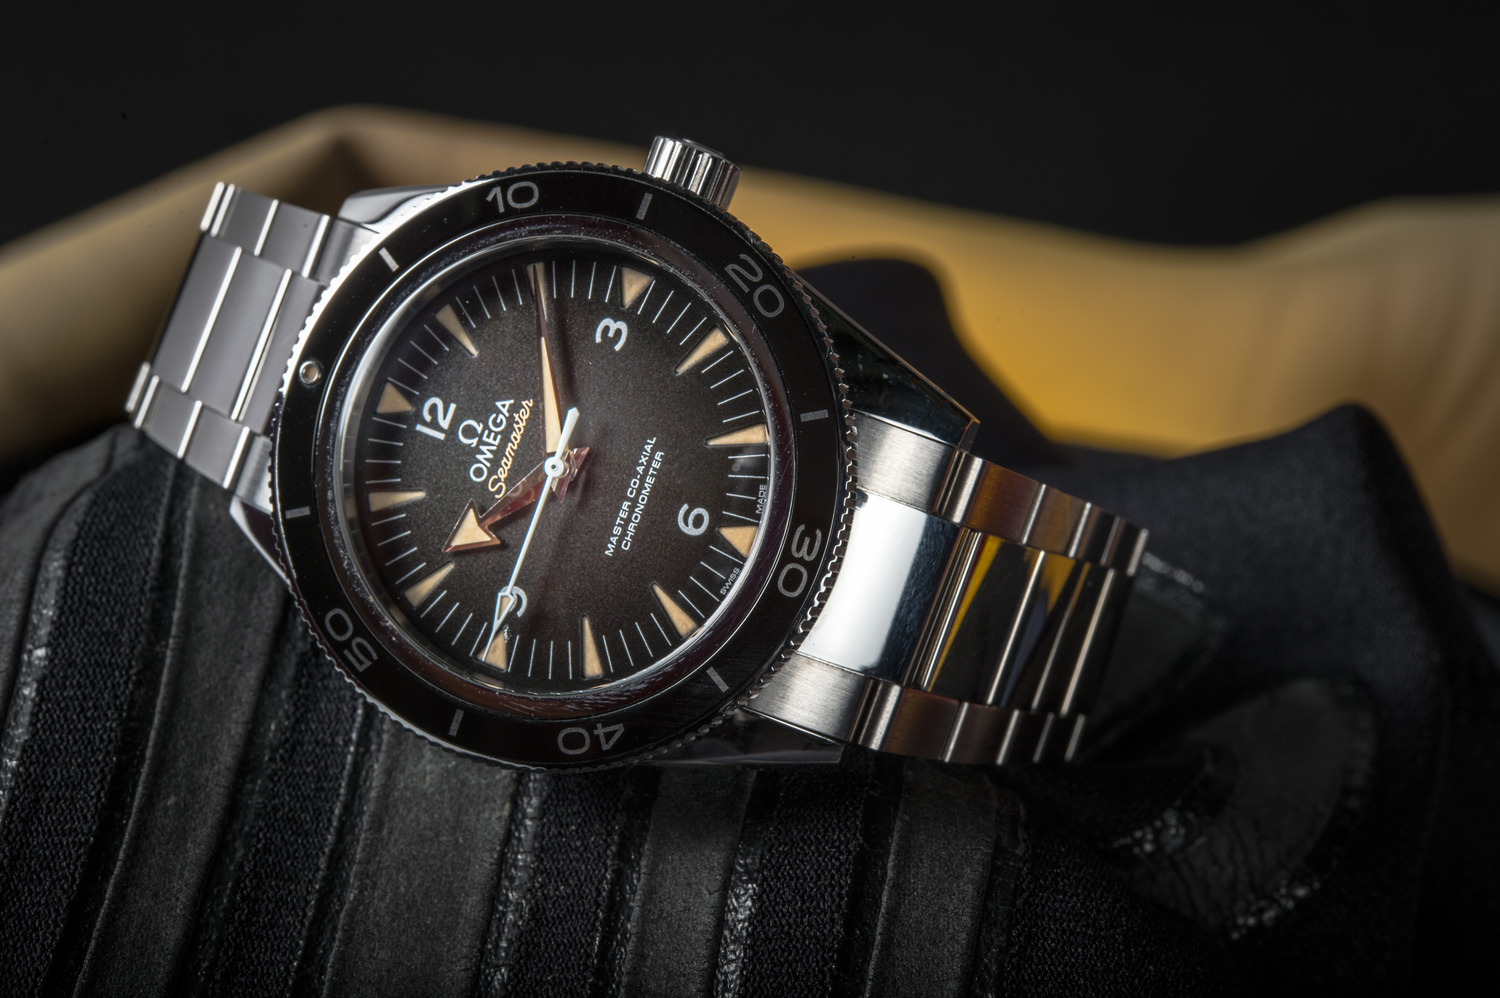 Diving Into The Past With The New Omega 